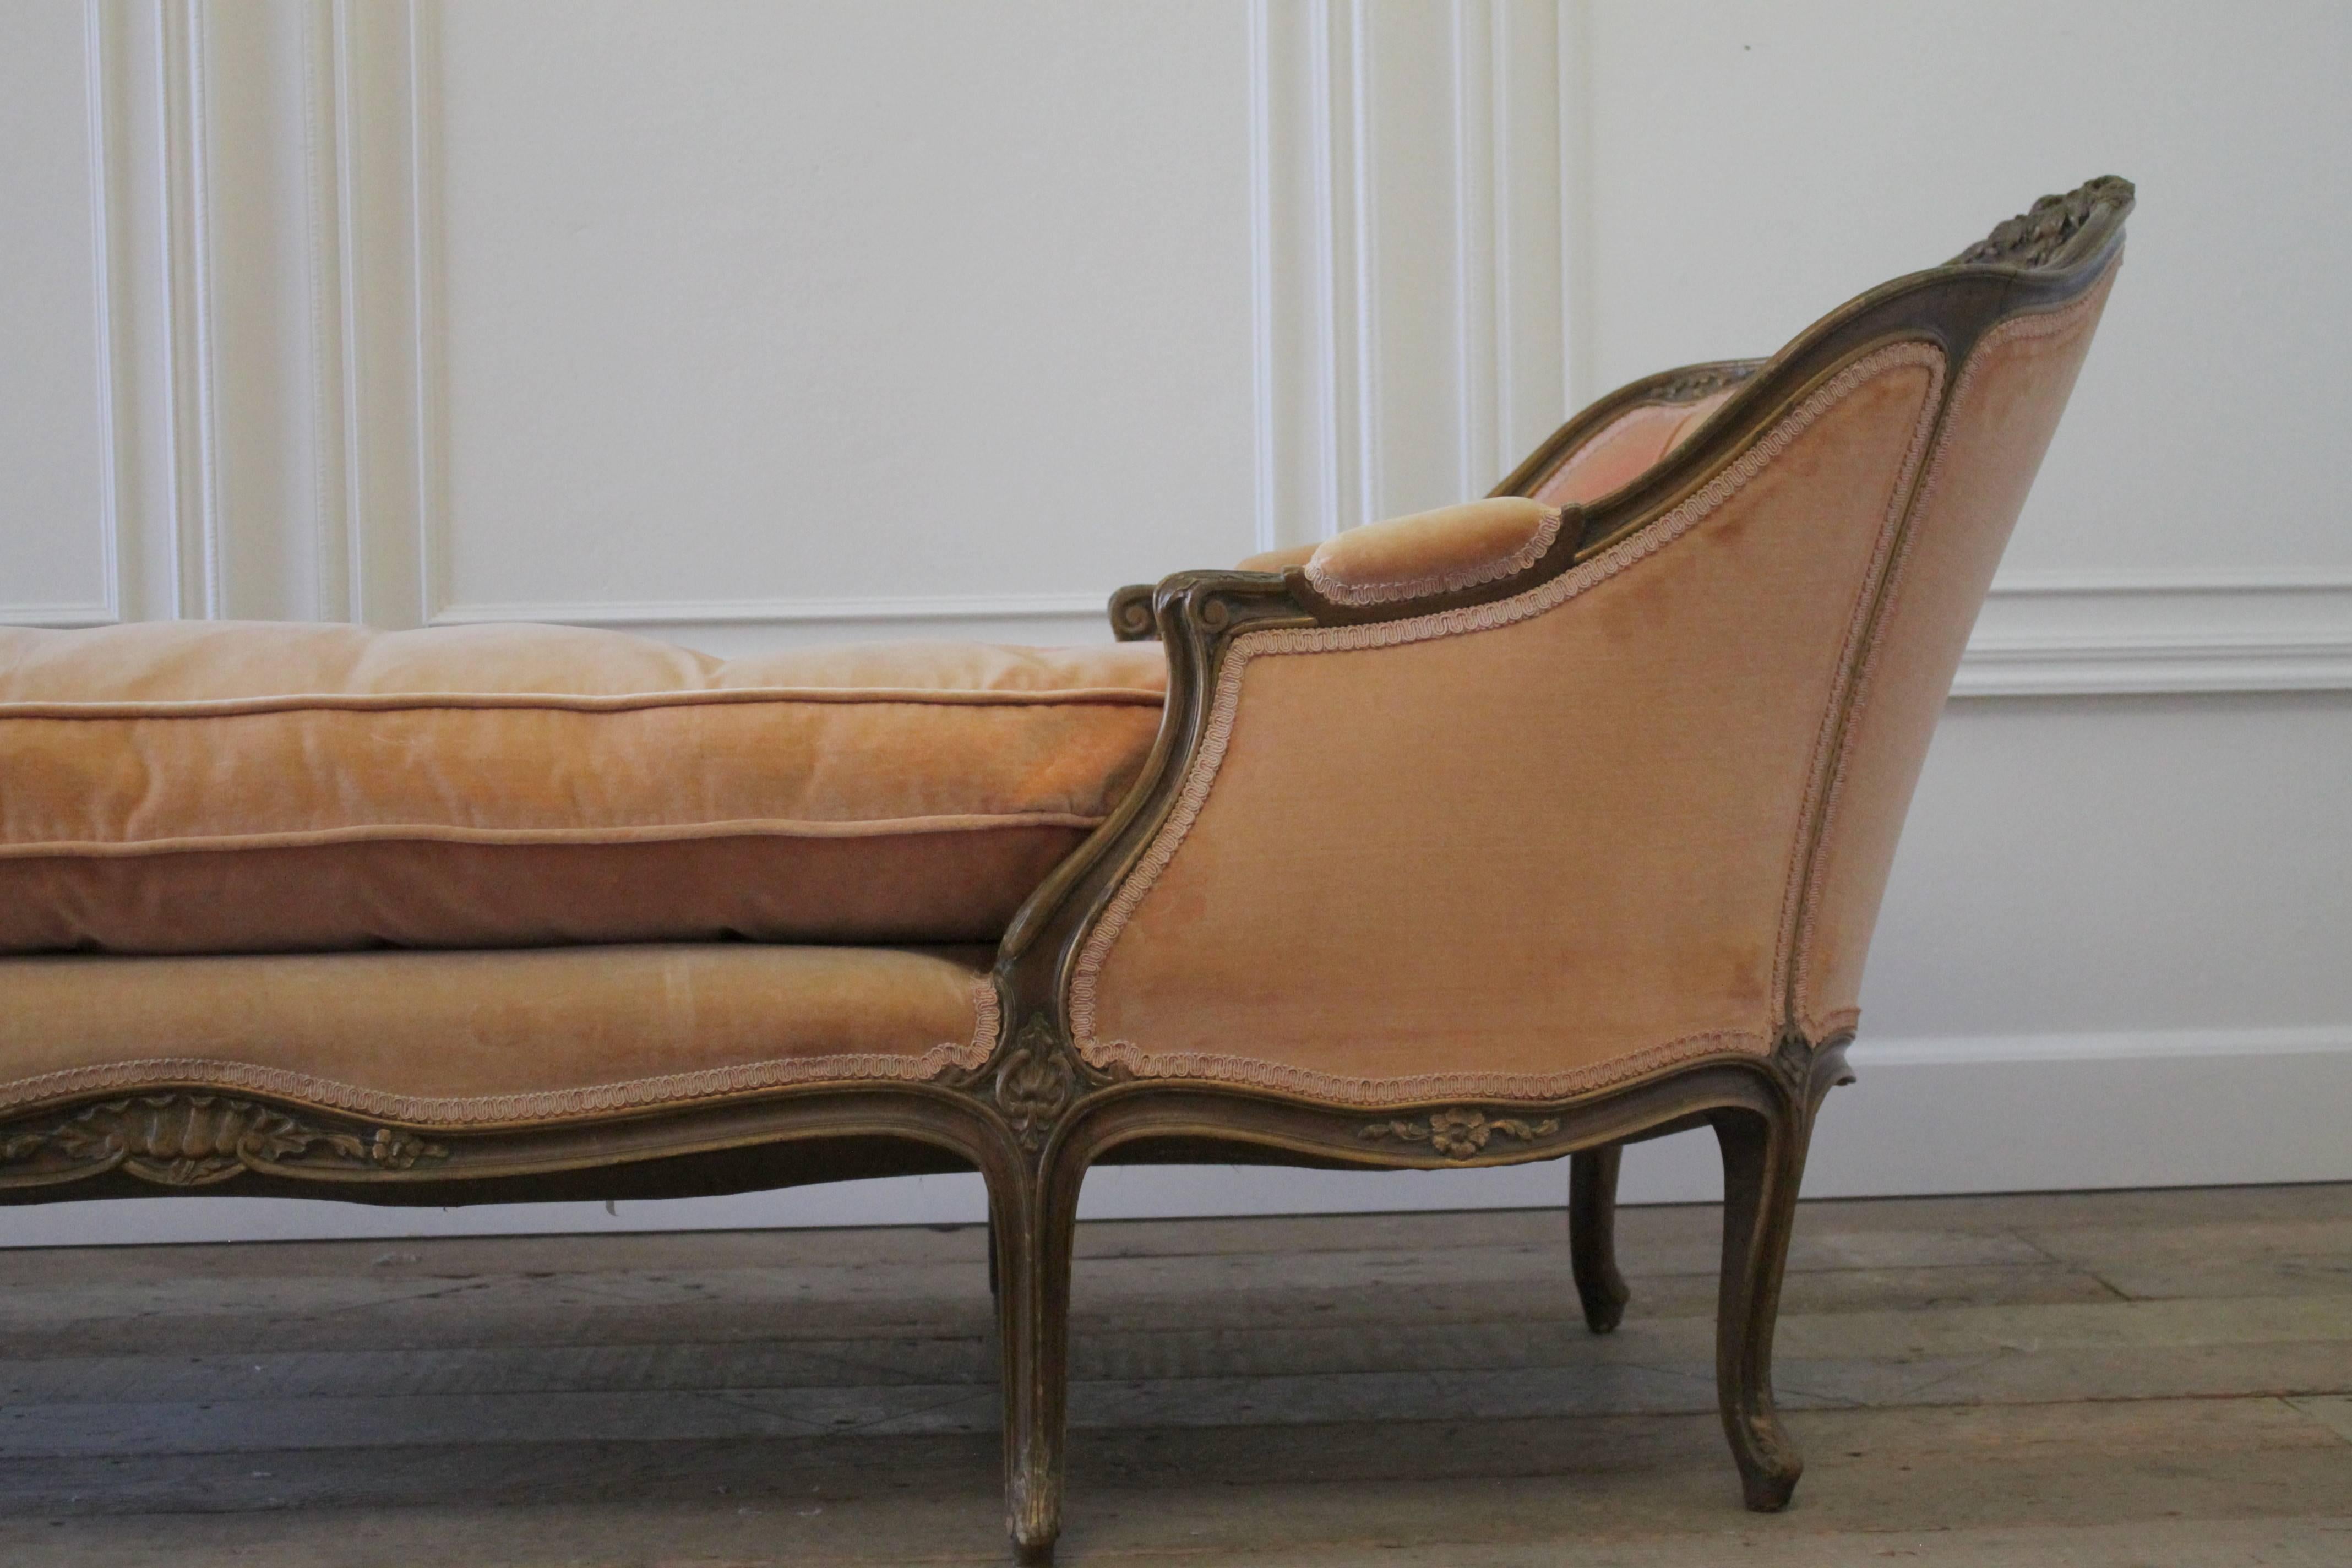 Carved 19th Century Antique French Louis XV Style Chaise Longue in Vintage Velvet